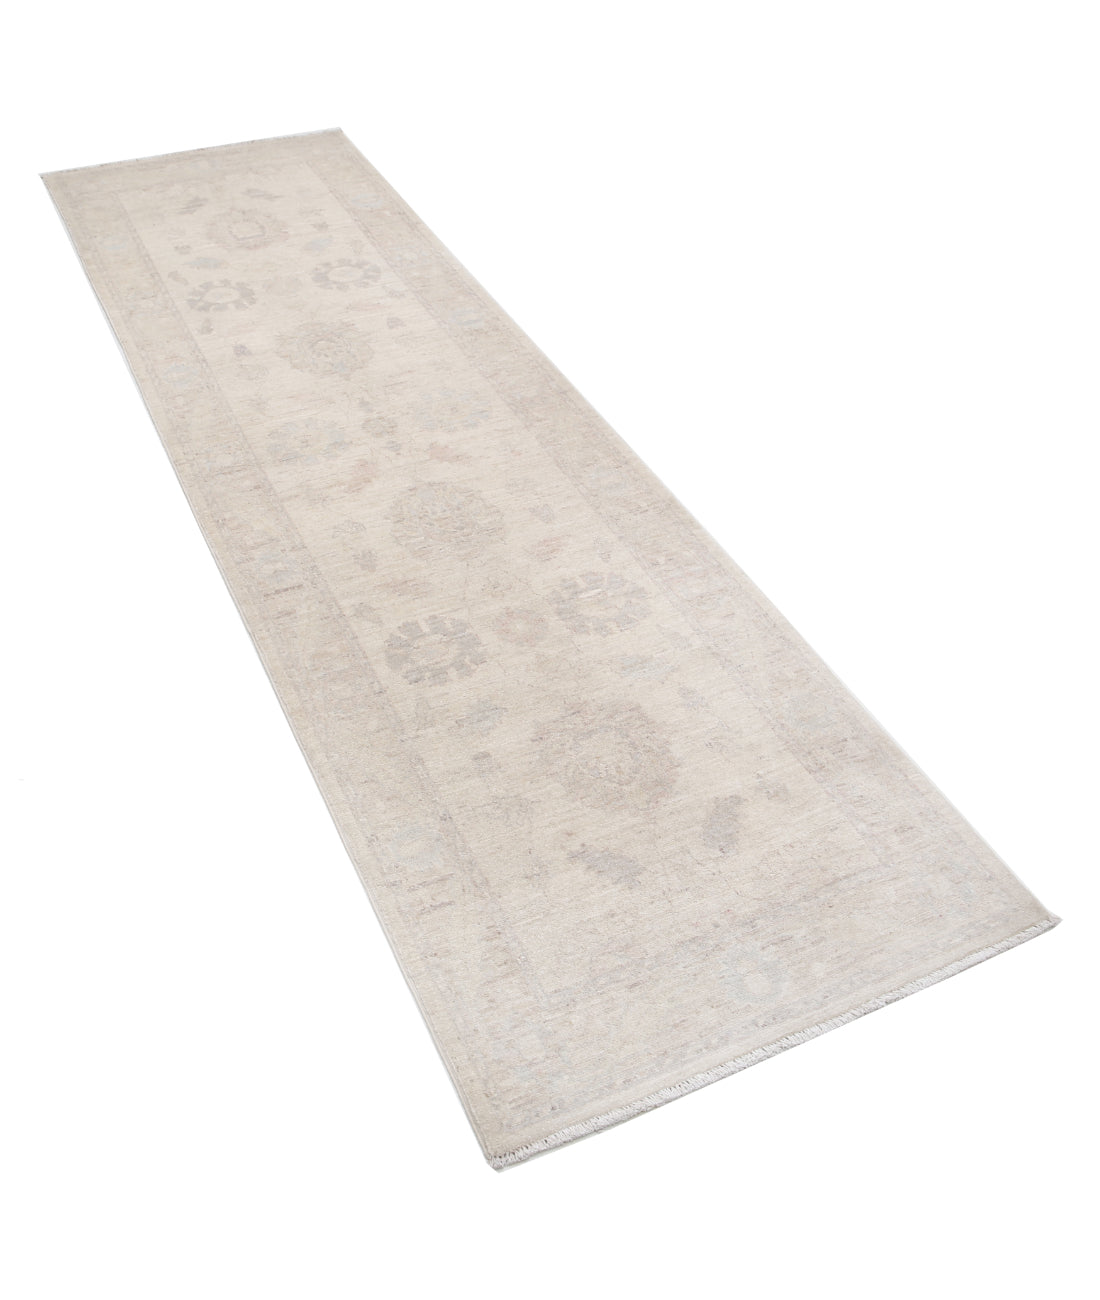 Hand Knotted Serenity Wool Rug - 2'6'' x 8'6'' 2'6'' x 8'6'' (75 X 255) / Ivory / Brown